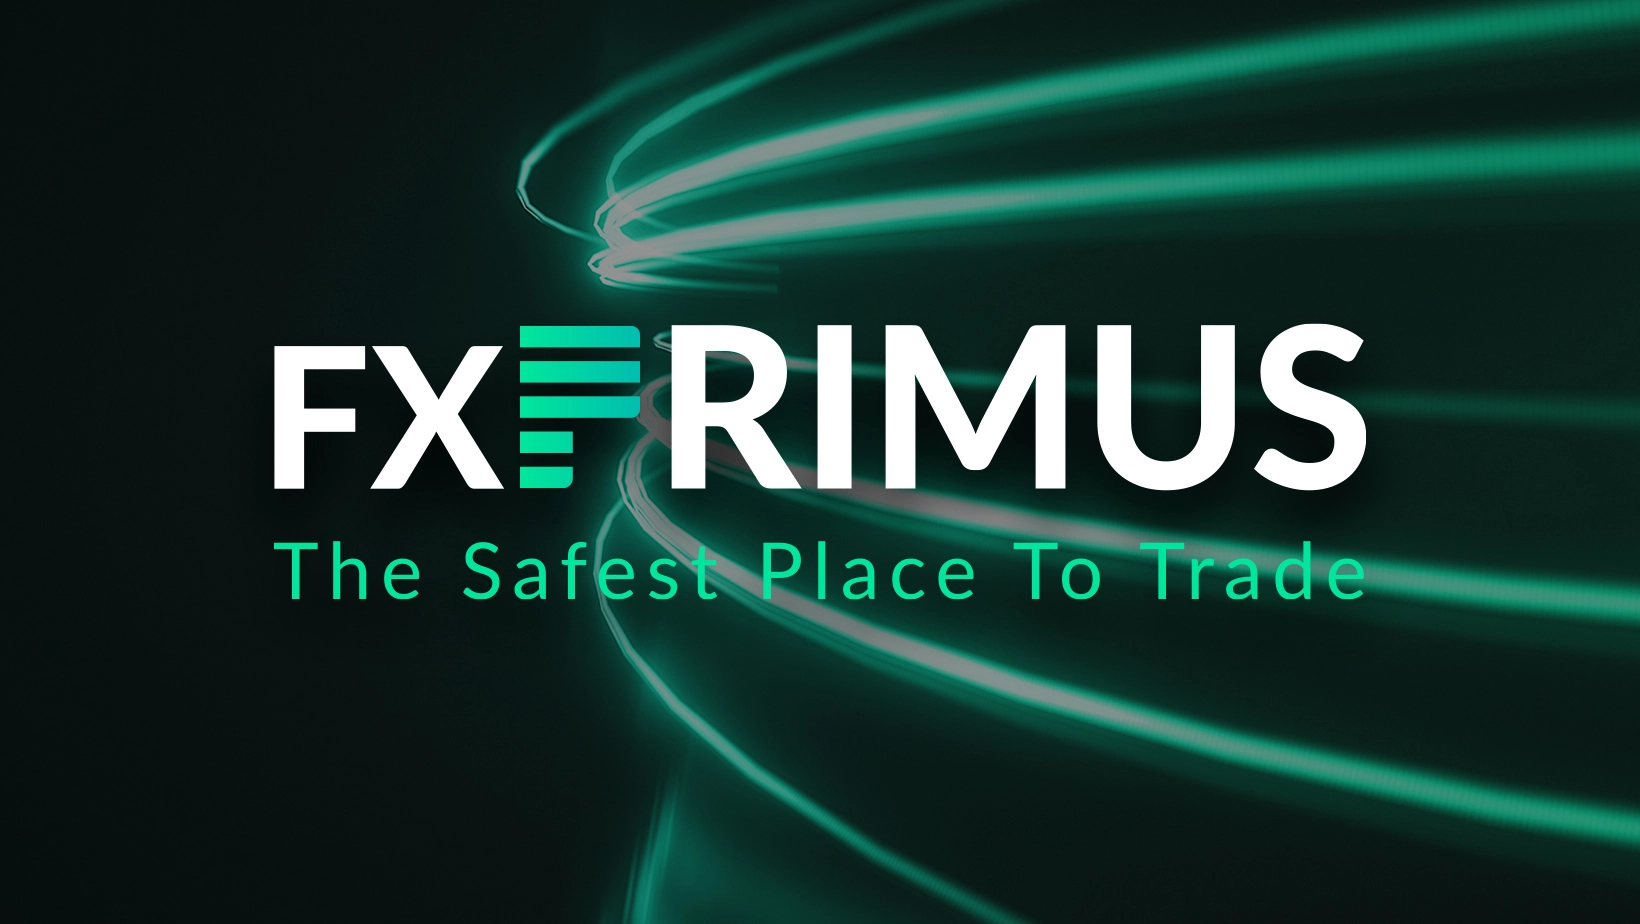 Forex & CFDs broker FXPRIMUS unveils new brand & trade-enhancing features